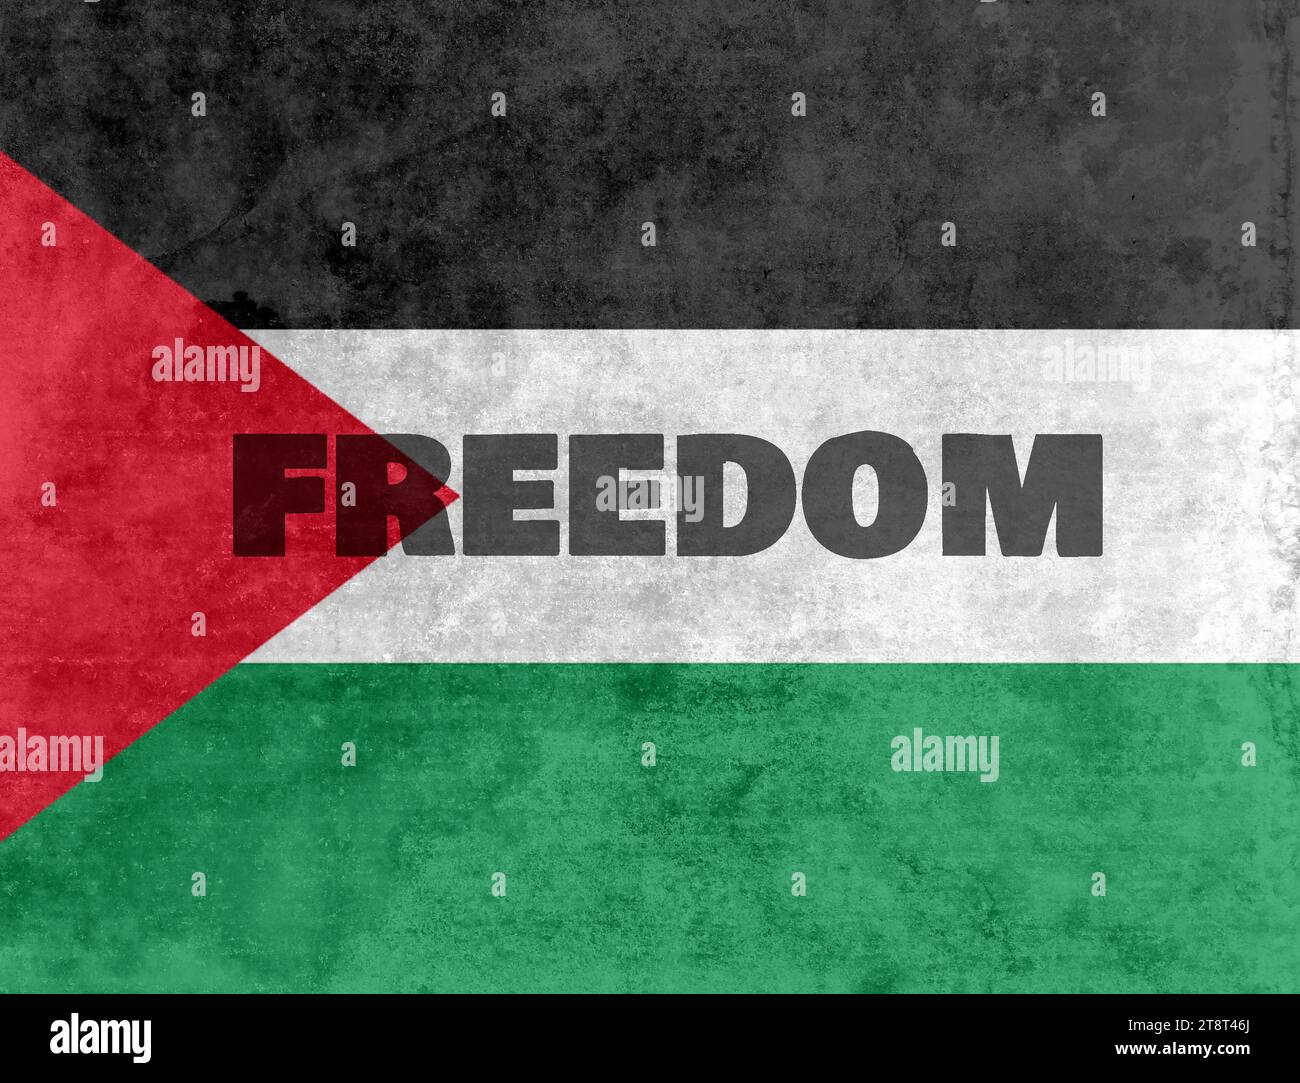 Damaged grunge flag of Palestine, Palestinian Territories with the text freedom Stock Photo